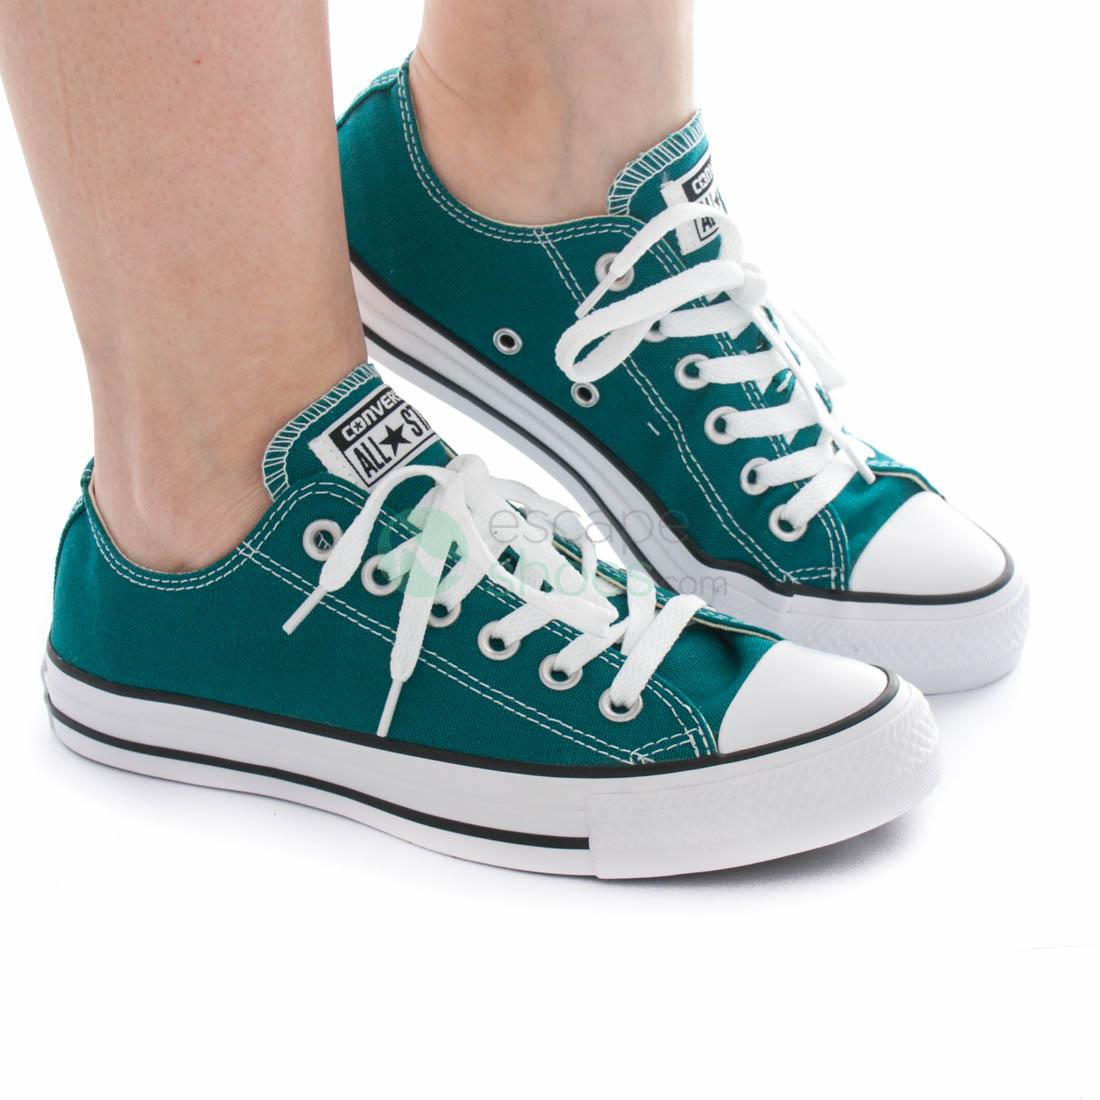 Sneakers CONVERSE Chuck Taylor All Star 